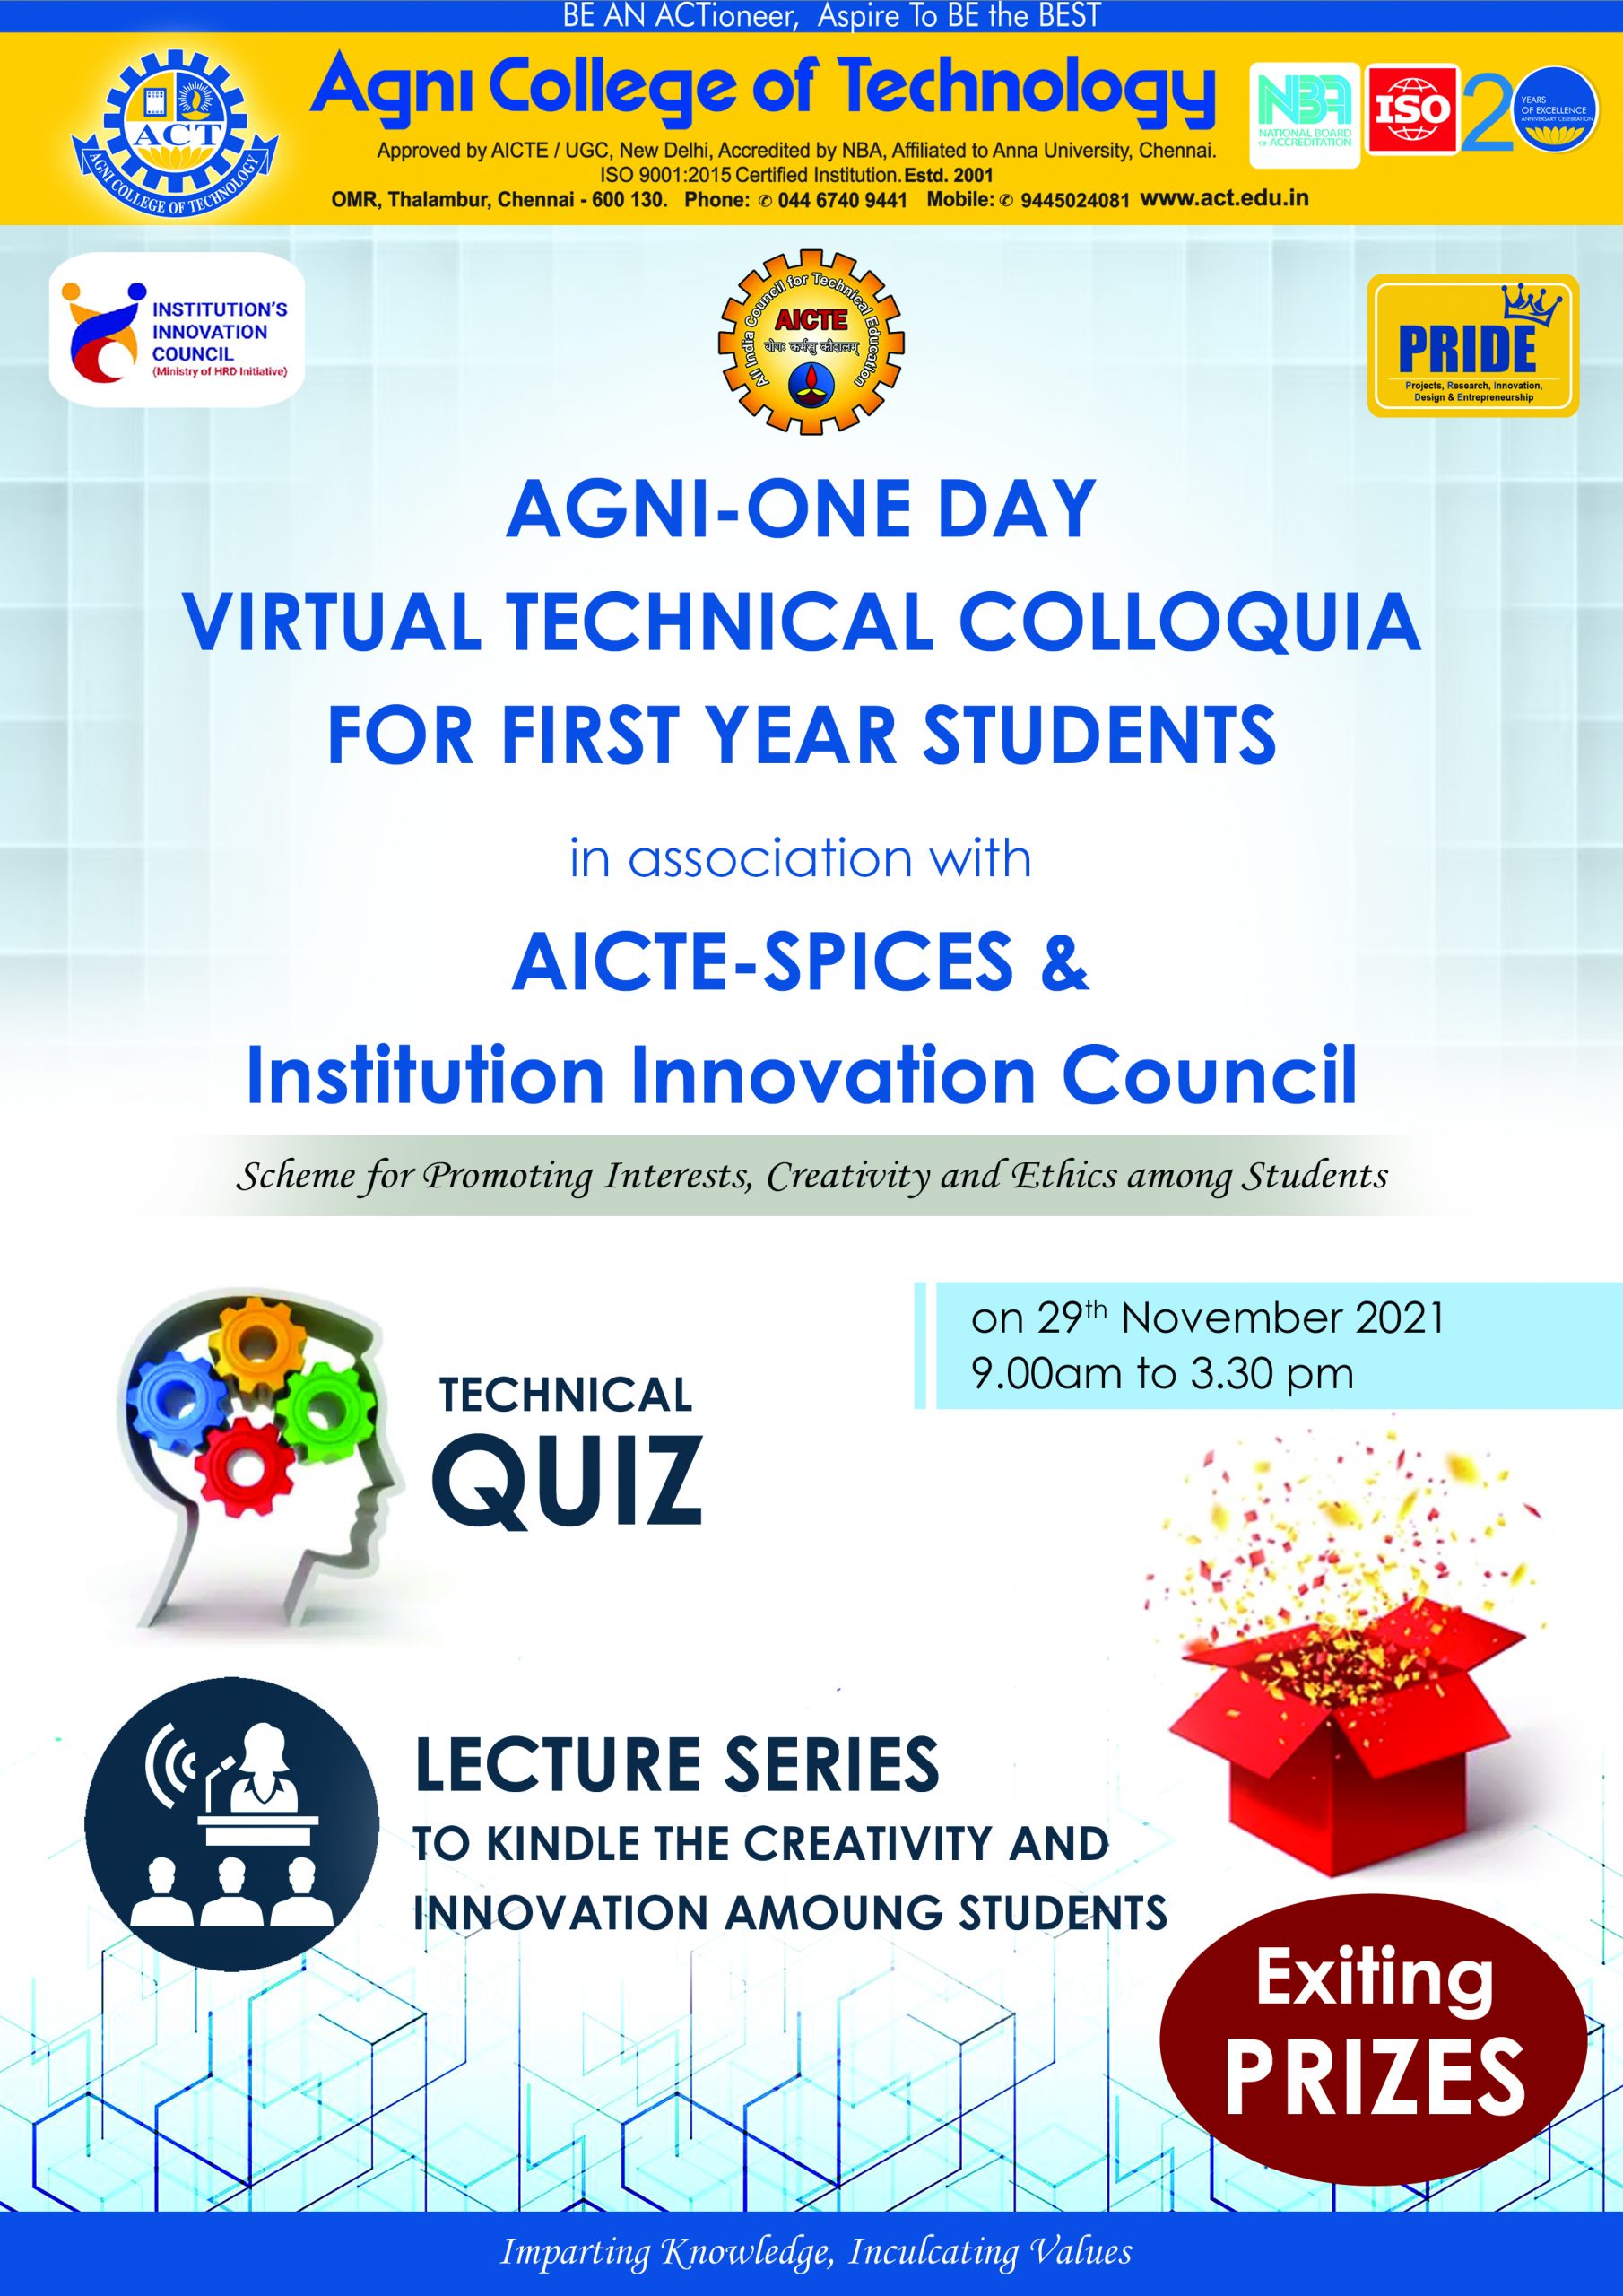 One Day  Virtual Technical Colloquia in association with AICTE-SPICES & IIC